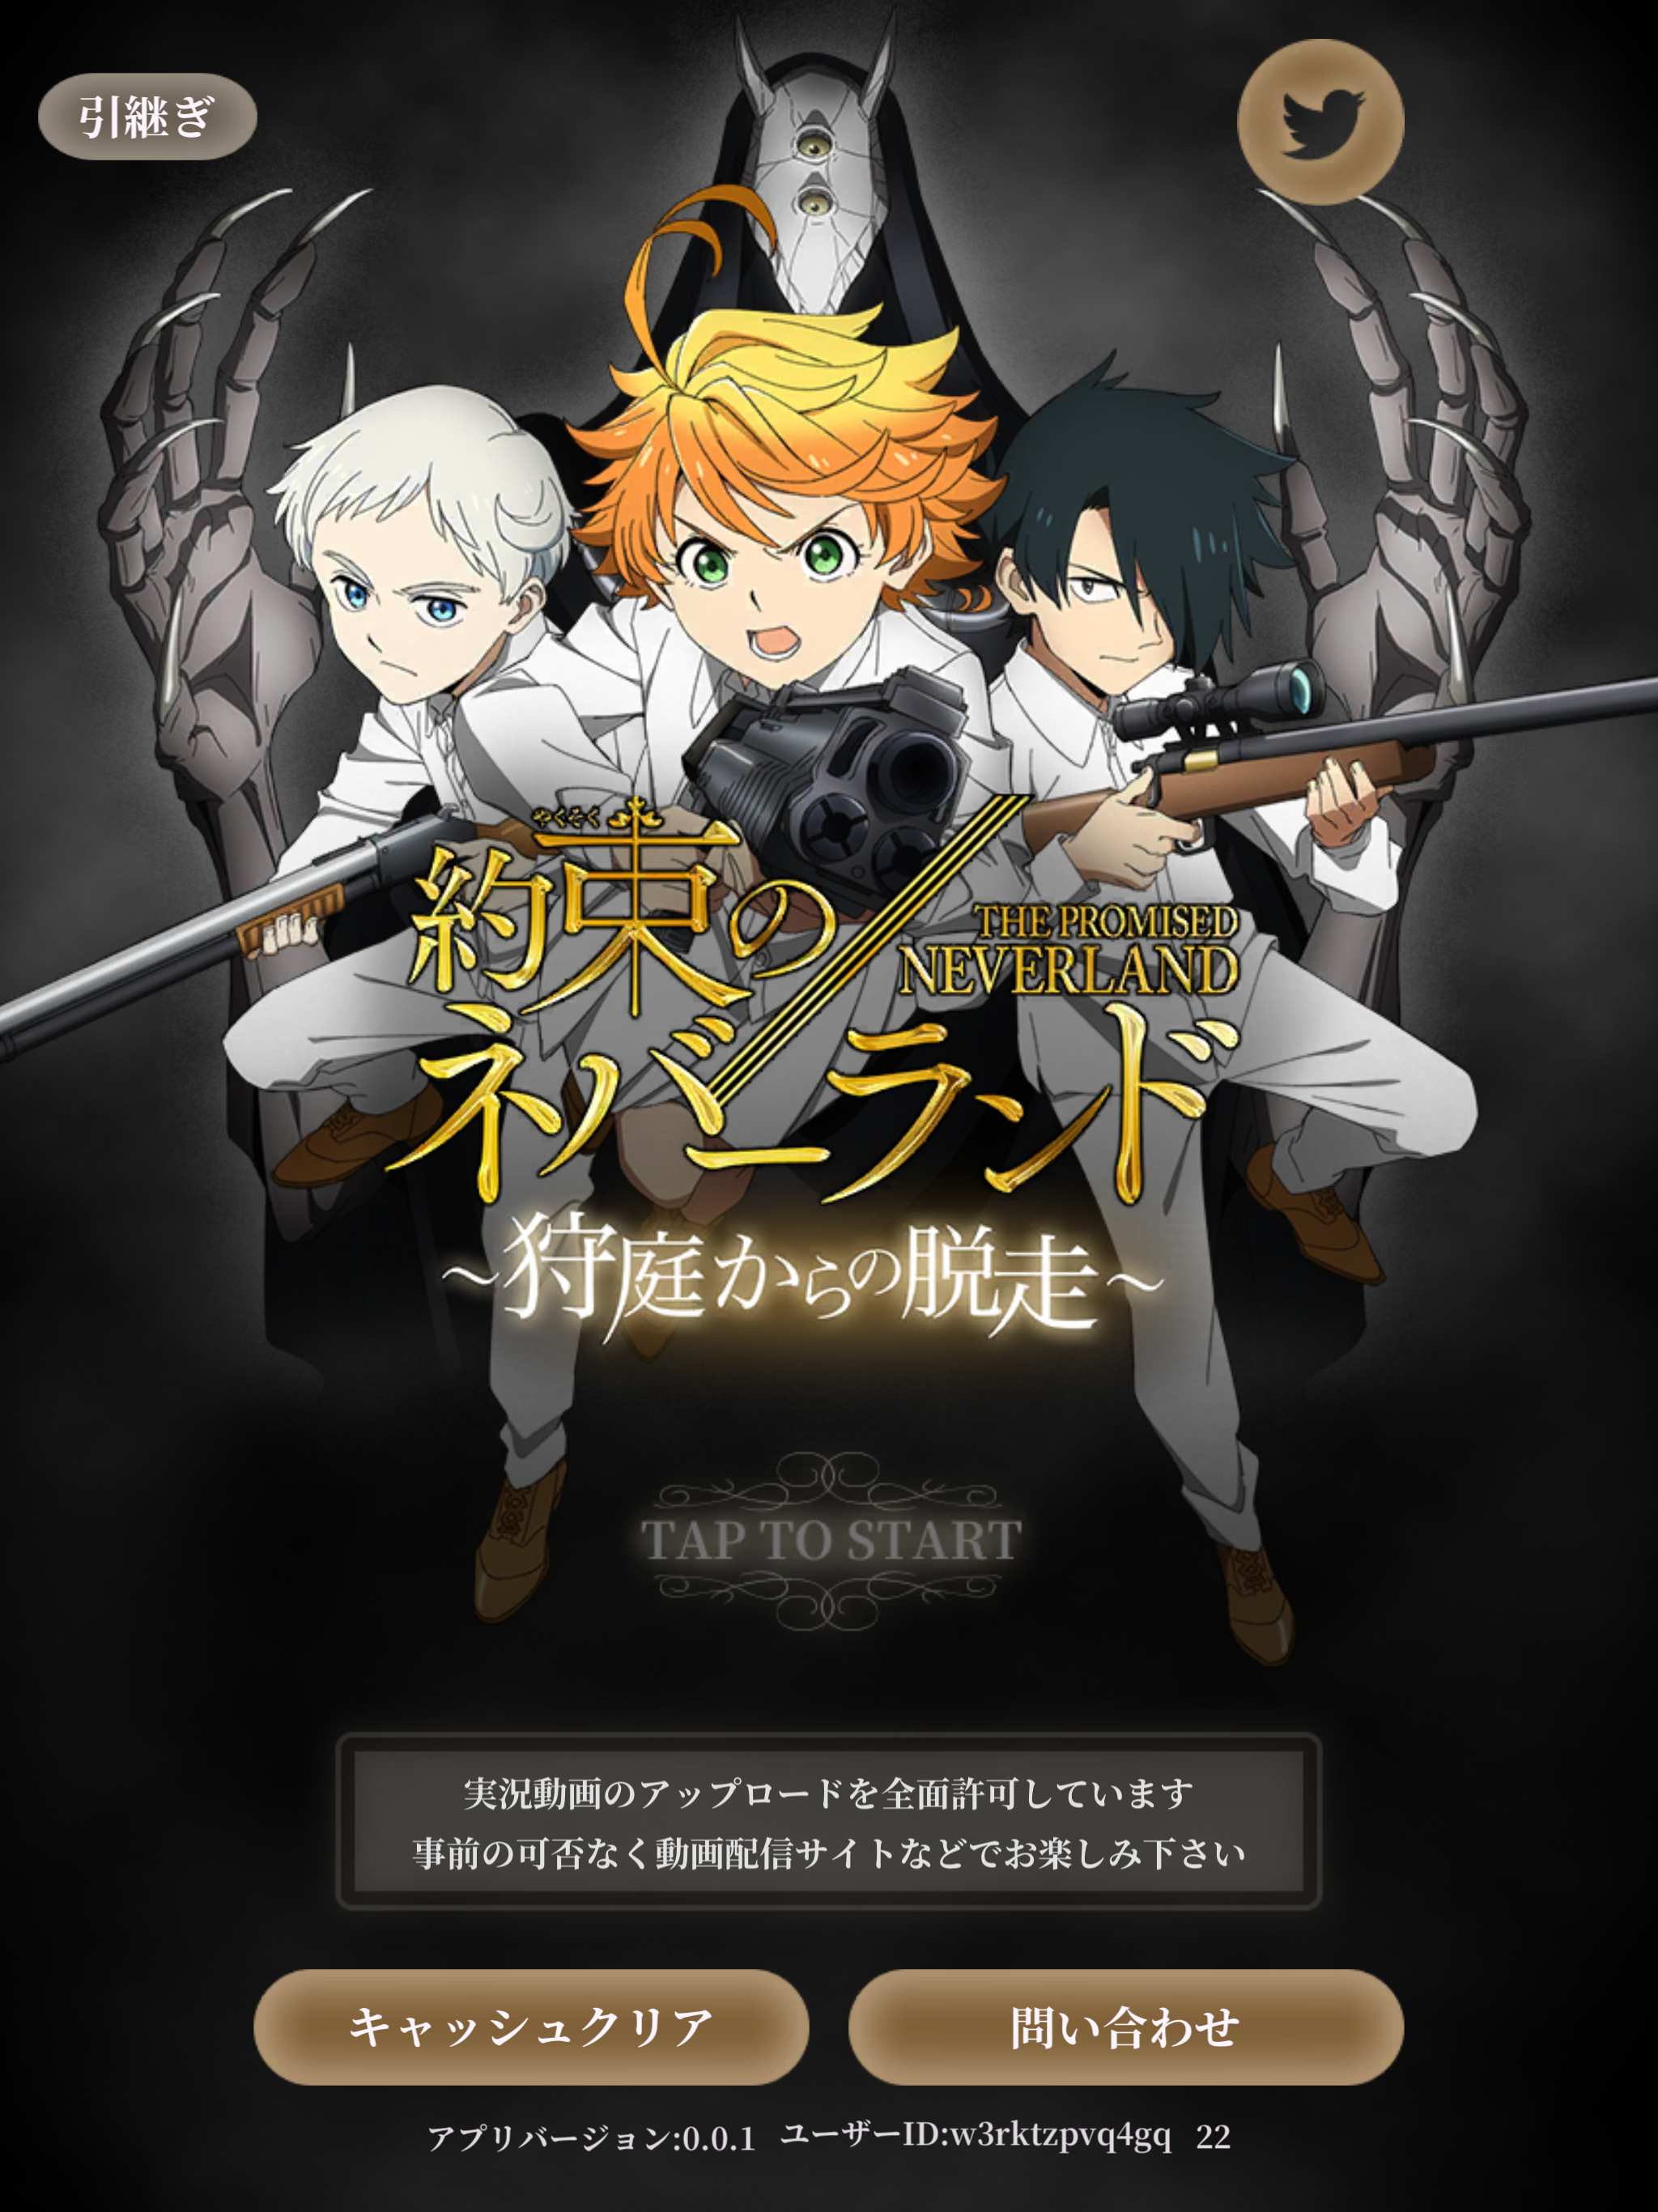 New English Subbed Trailer for The Anime THE PROMISED NEVERLAND — GeekTyrant